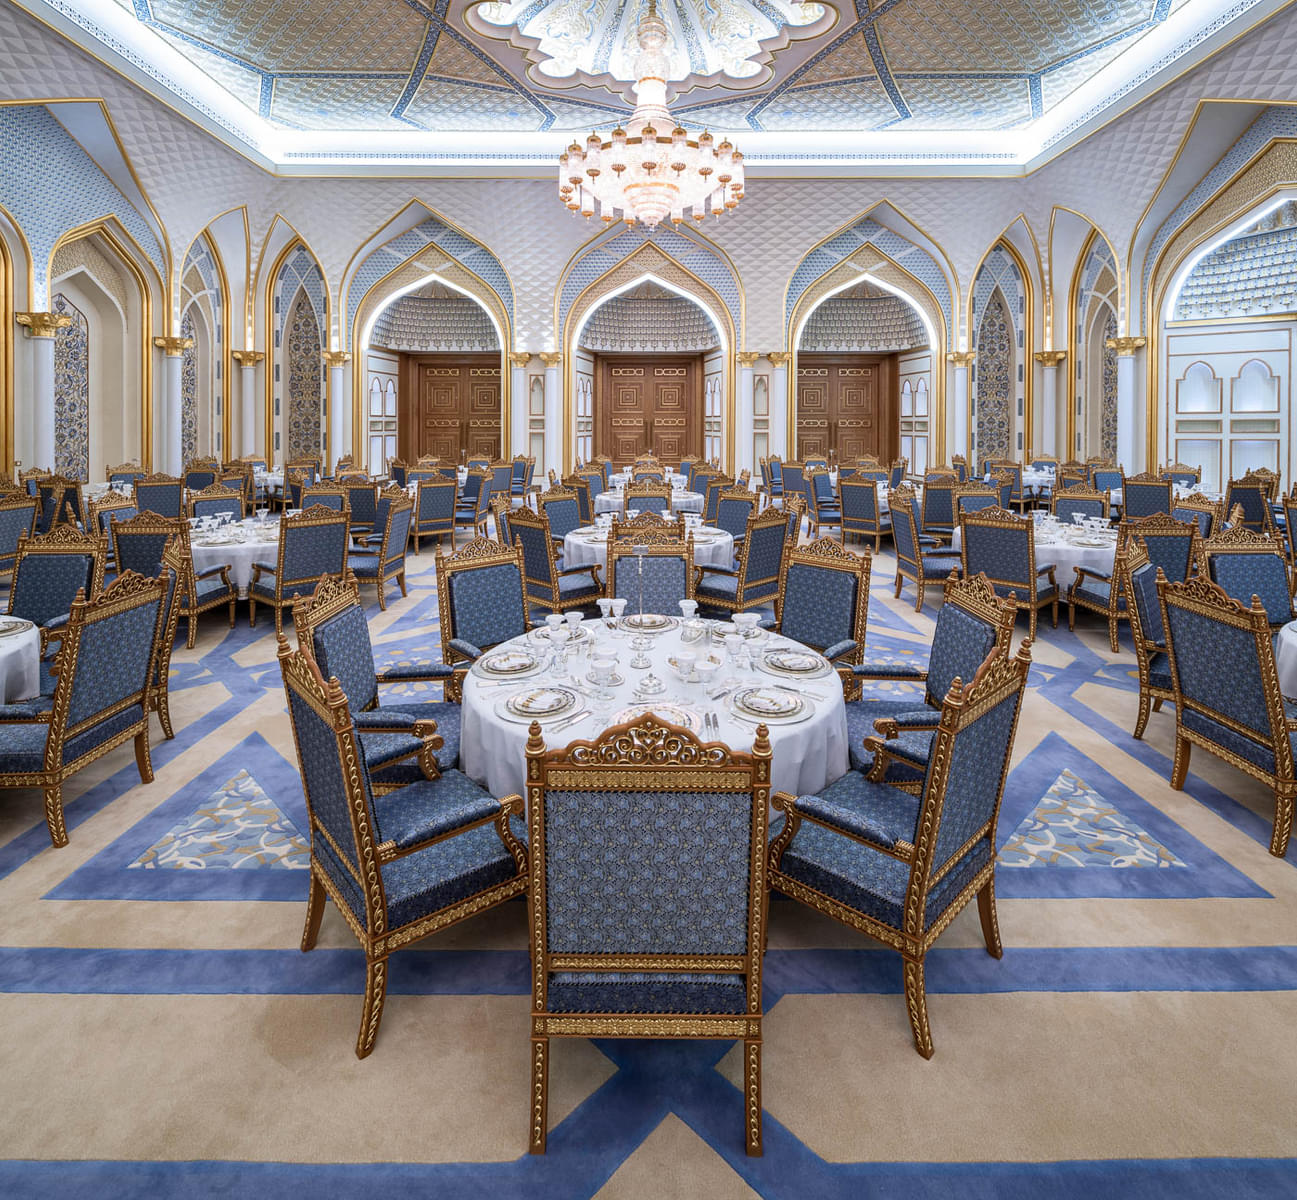 The Presidential Banquet Hall